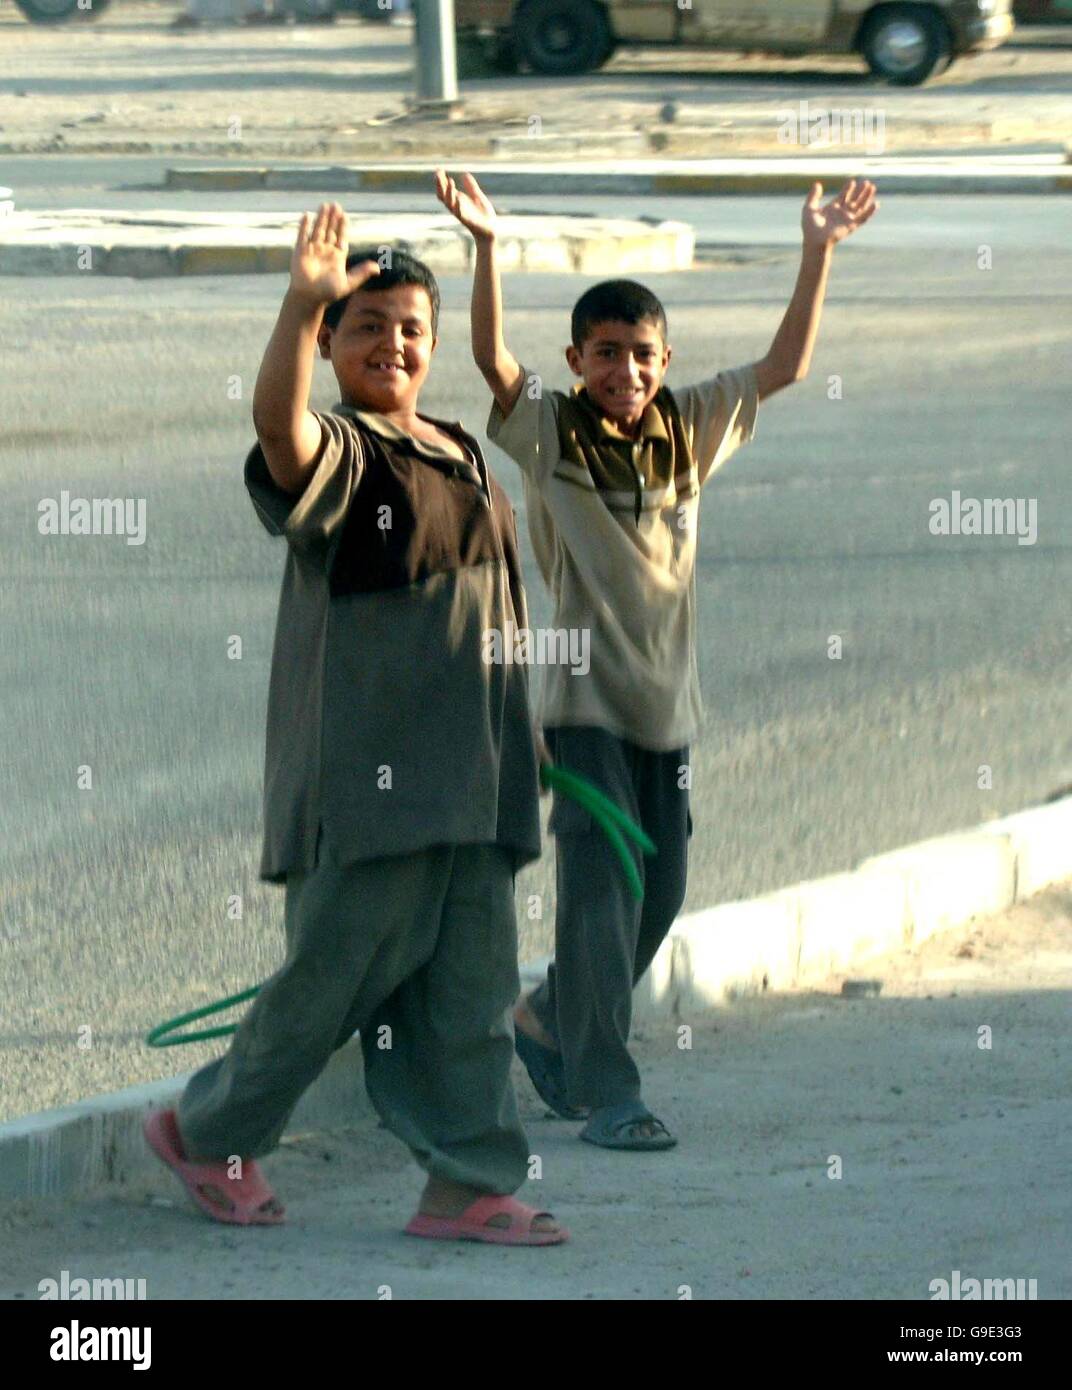 Iraqi children wave as normal life returned to some areas of Iraq and in the city of As Samawah the capital of the Al Muthanna province, where the local sheep market is again thriving. Stock Photo